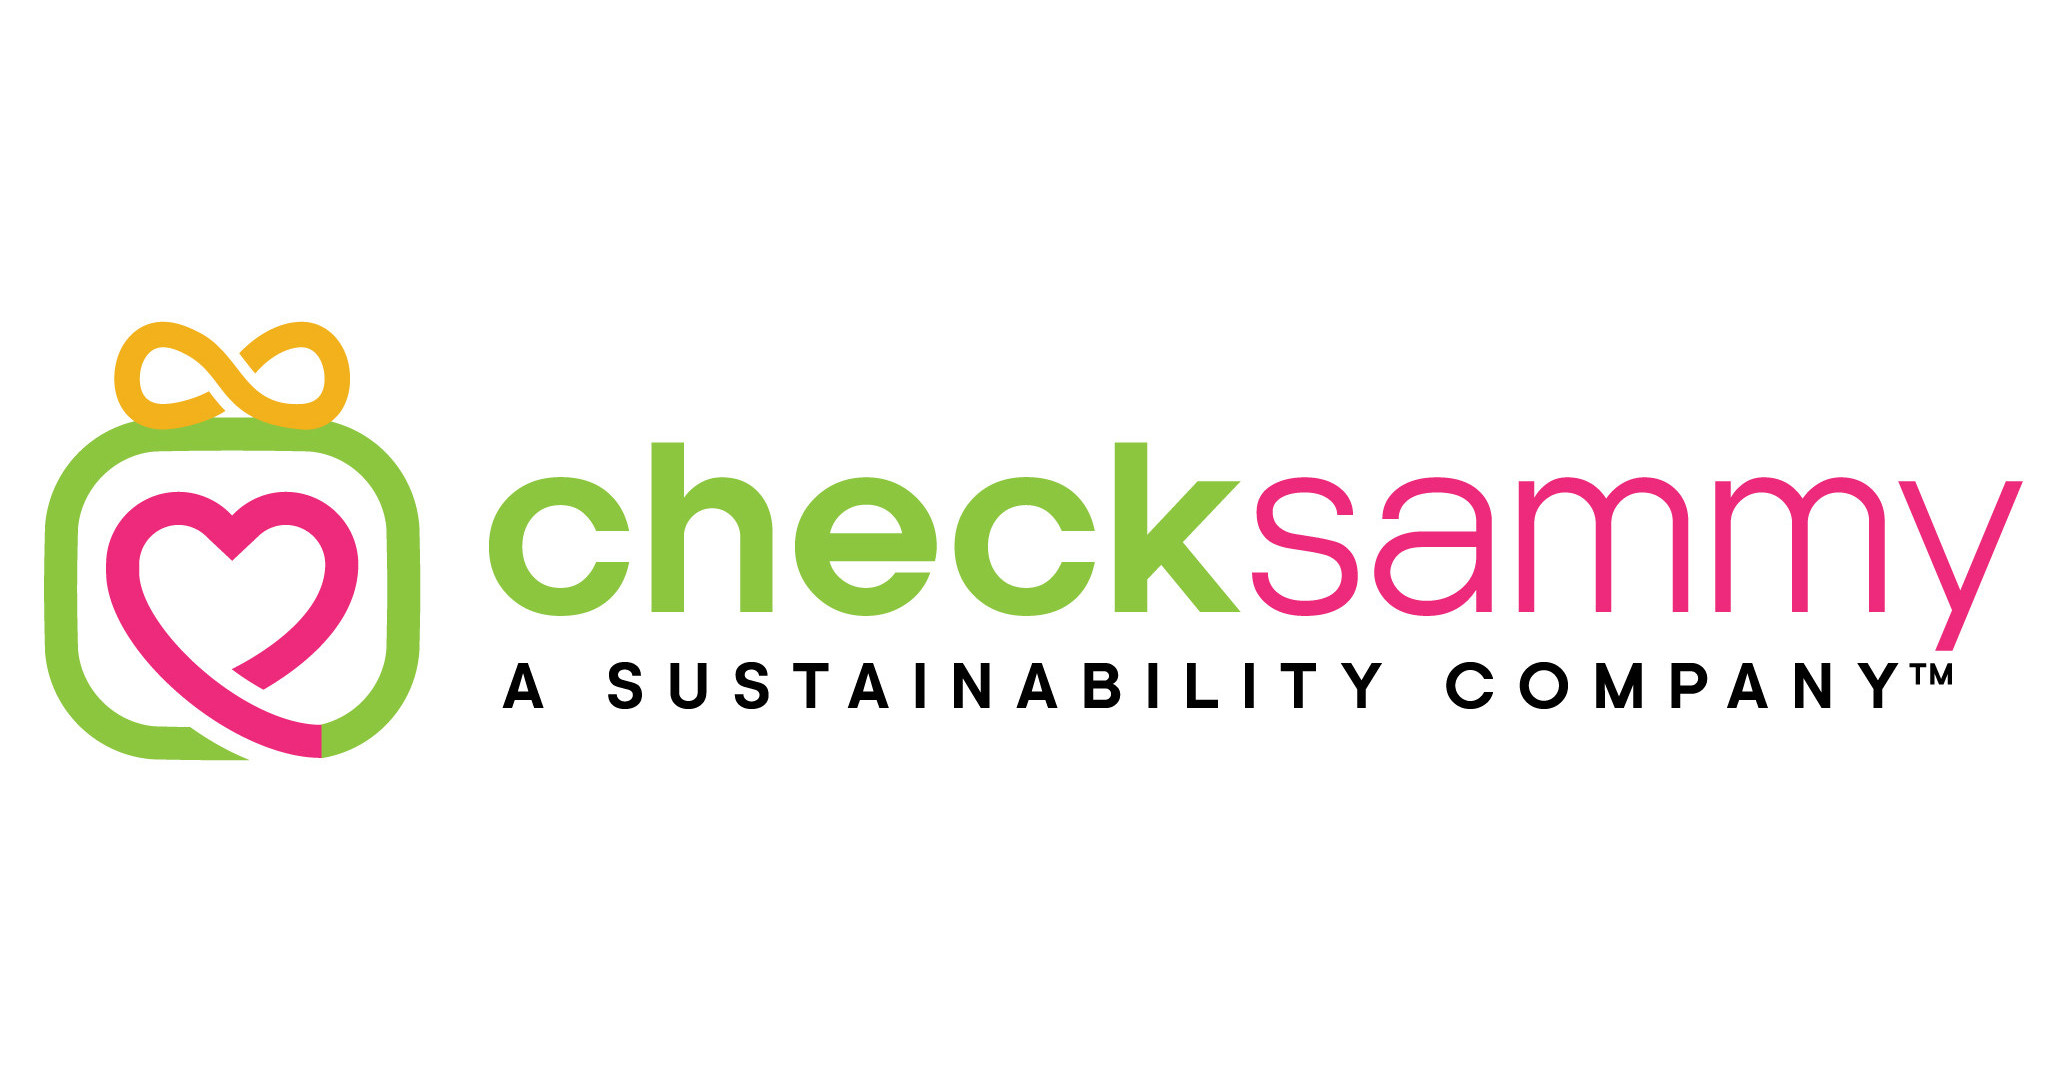 CheckSammy is the largest tech-driven sustainability and waste services marketplace. Through its asset-light digital marketplace of haulers, partners and service providers across North America, CheckSammy cost-effectively diverts waste from landfills towards sustainable outcomes. The company empowers fiscally and environmentally responsible decision-making with data and transparency for all industries and customers of all sizes.